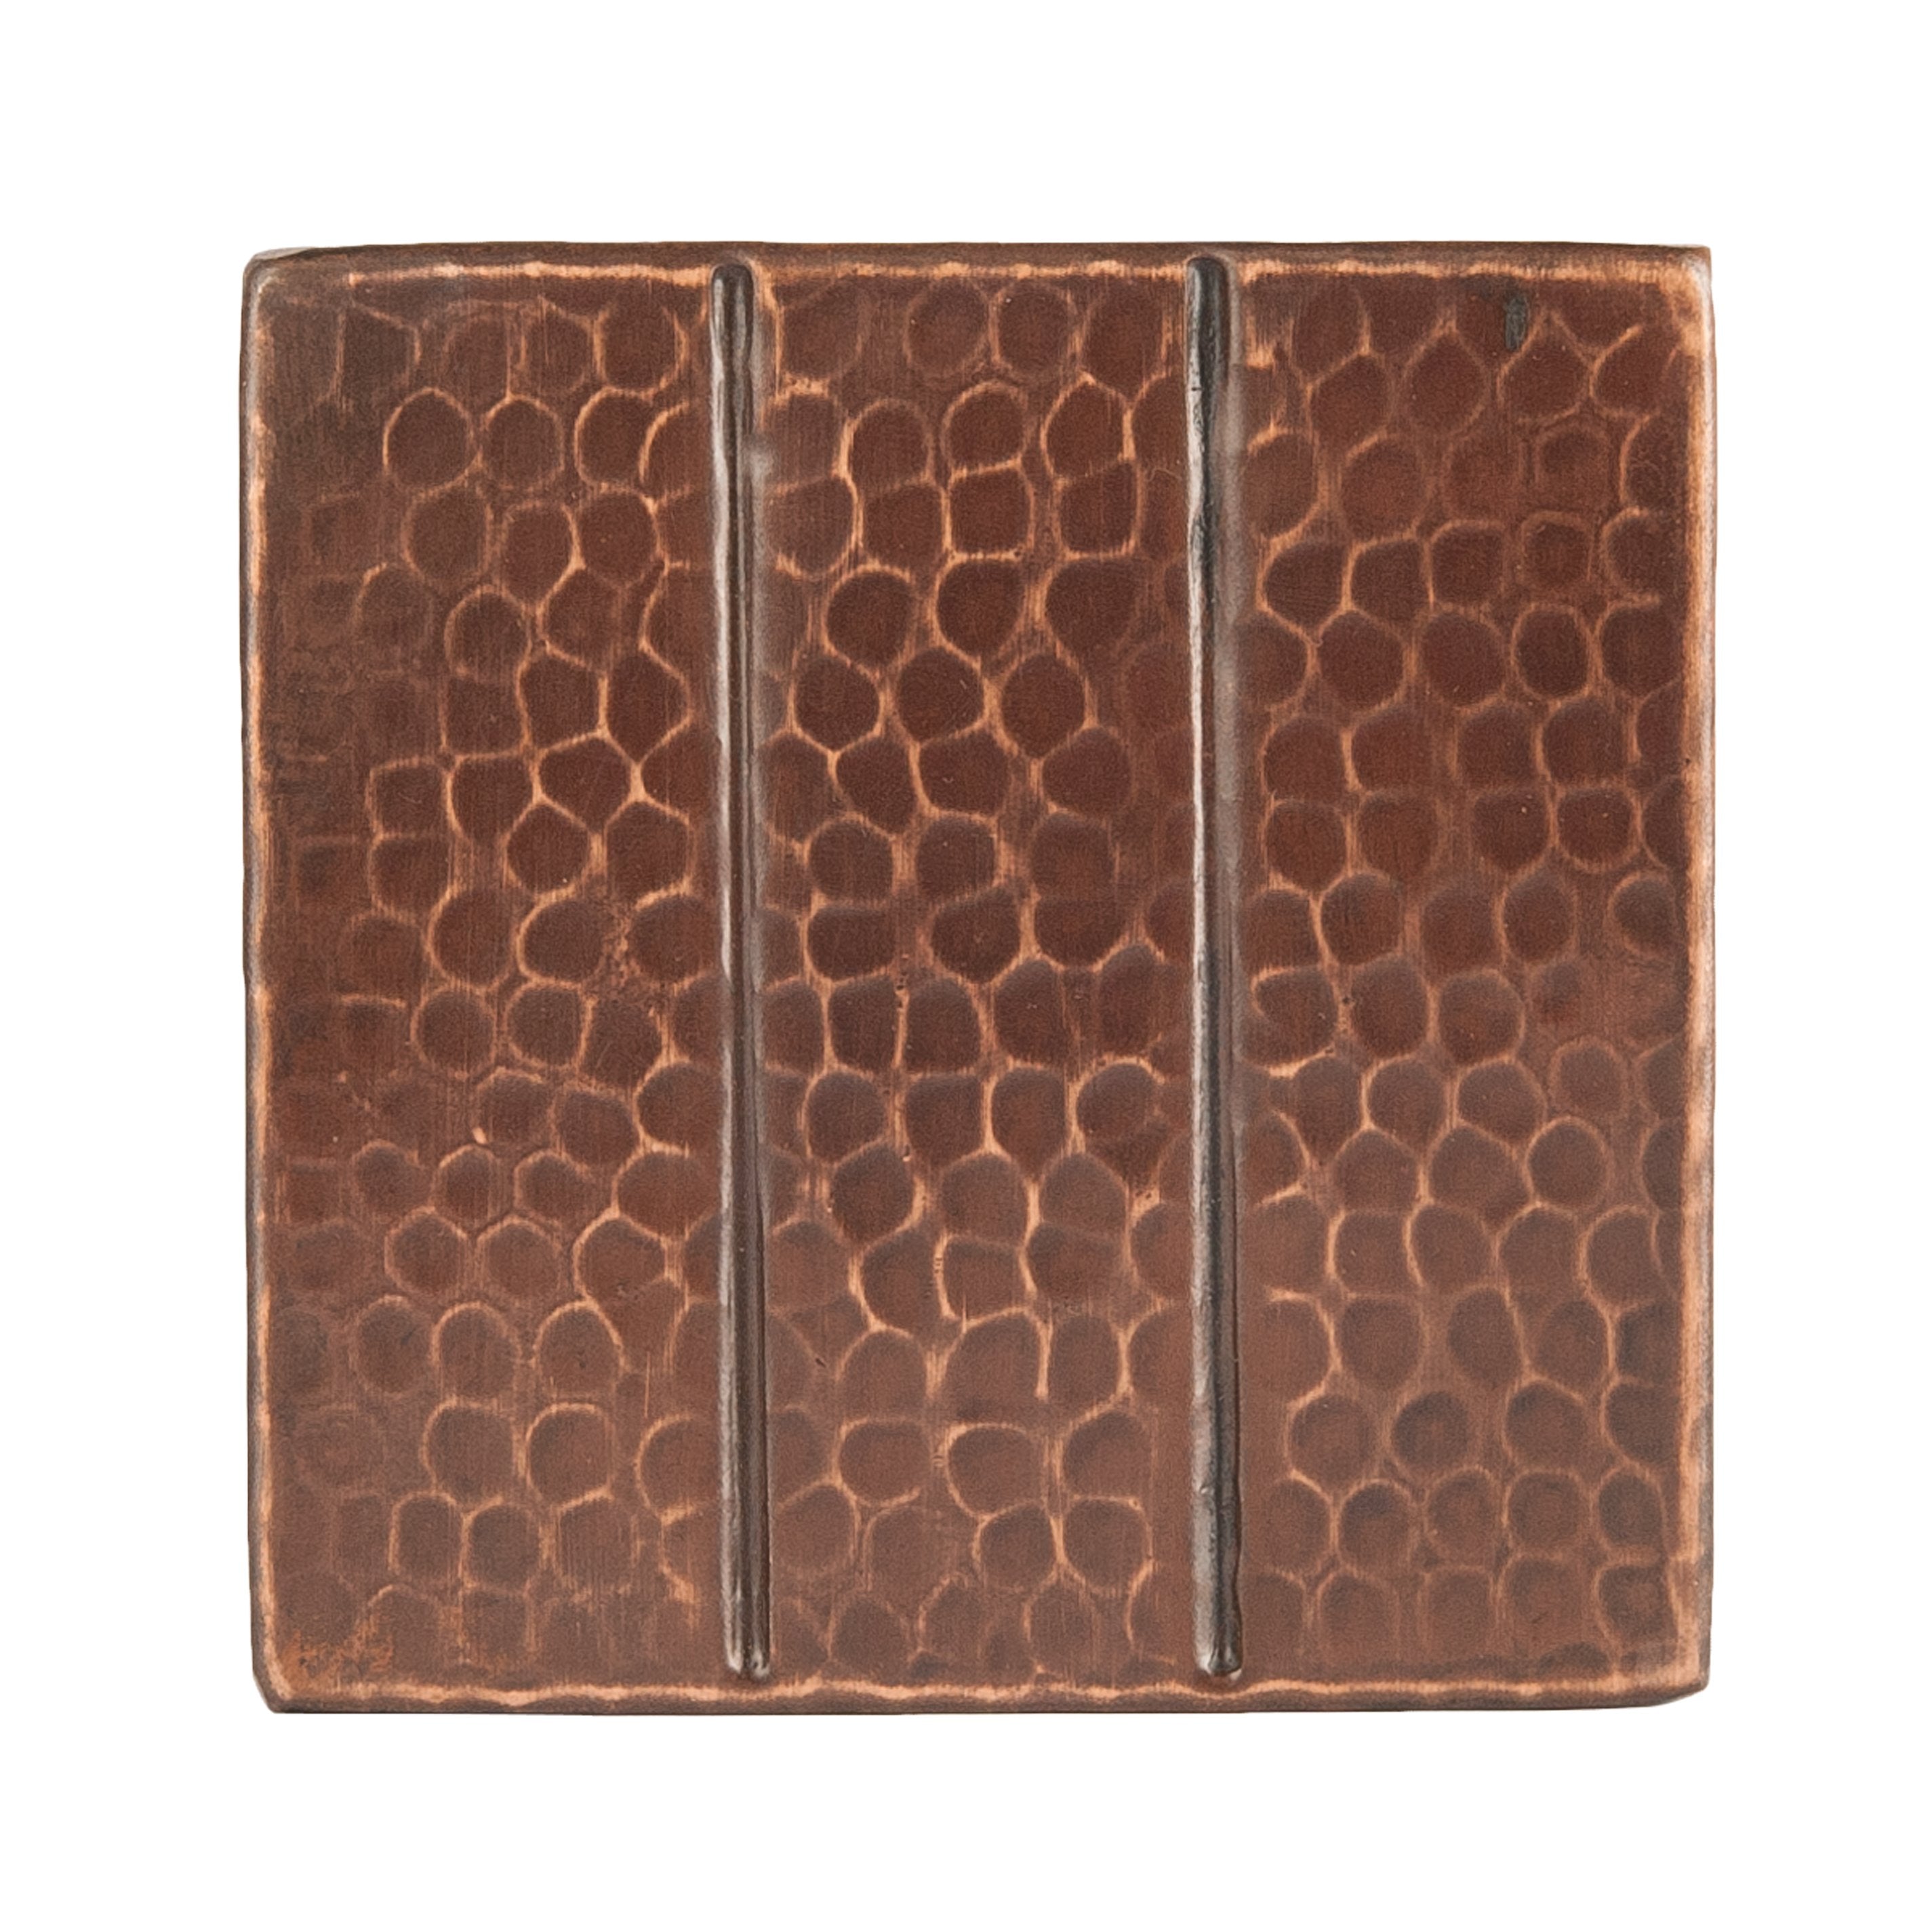 Premier Copper Products 4" x 4" Hammered Copper Tile with Linear Design-DirectSinks